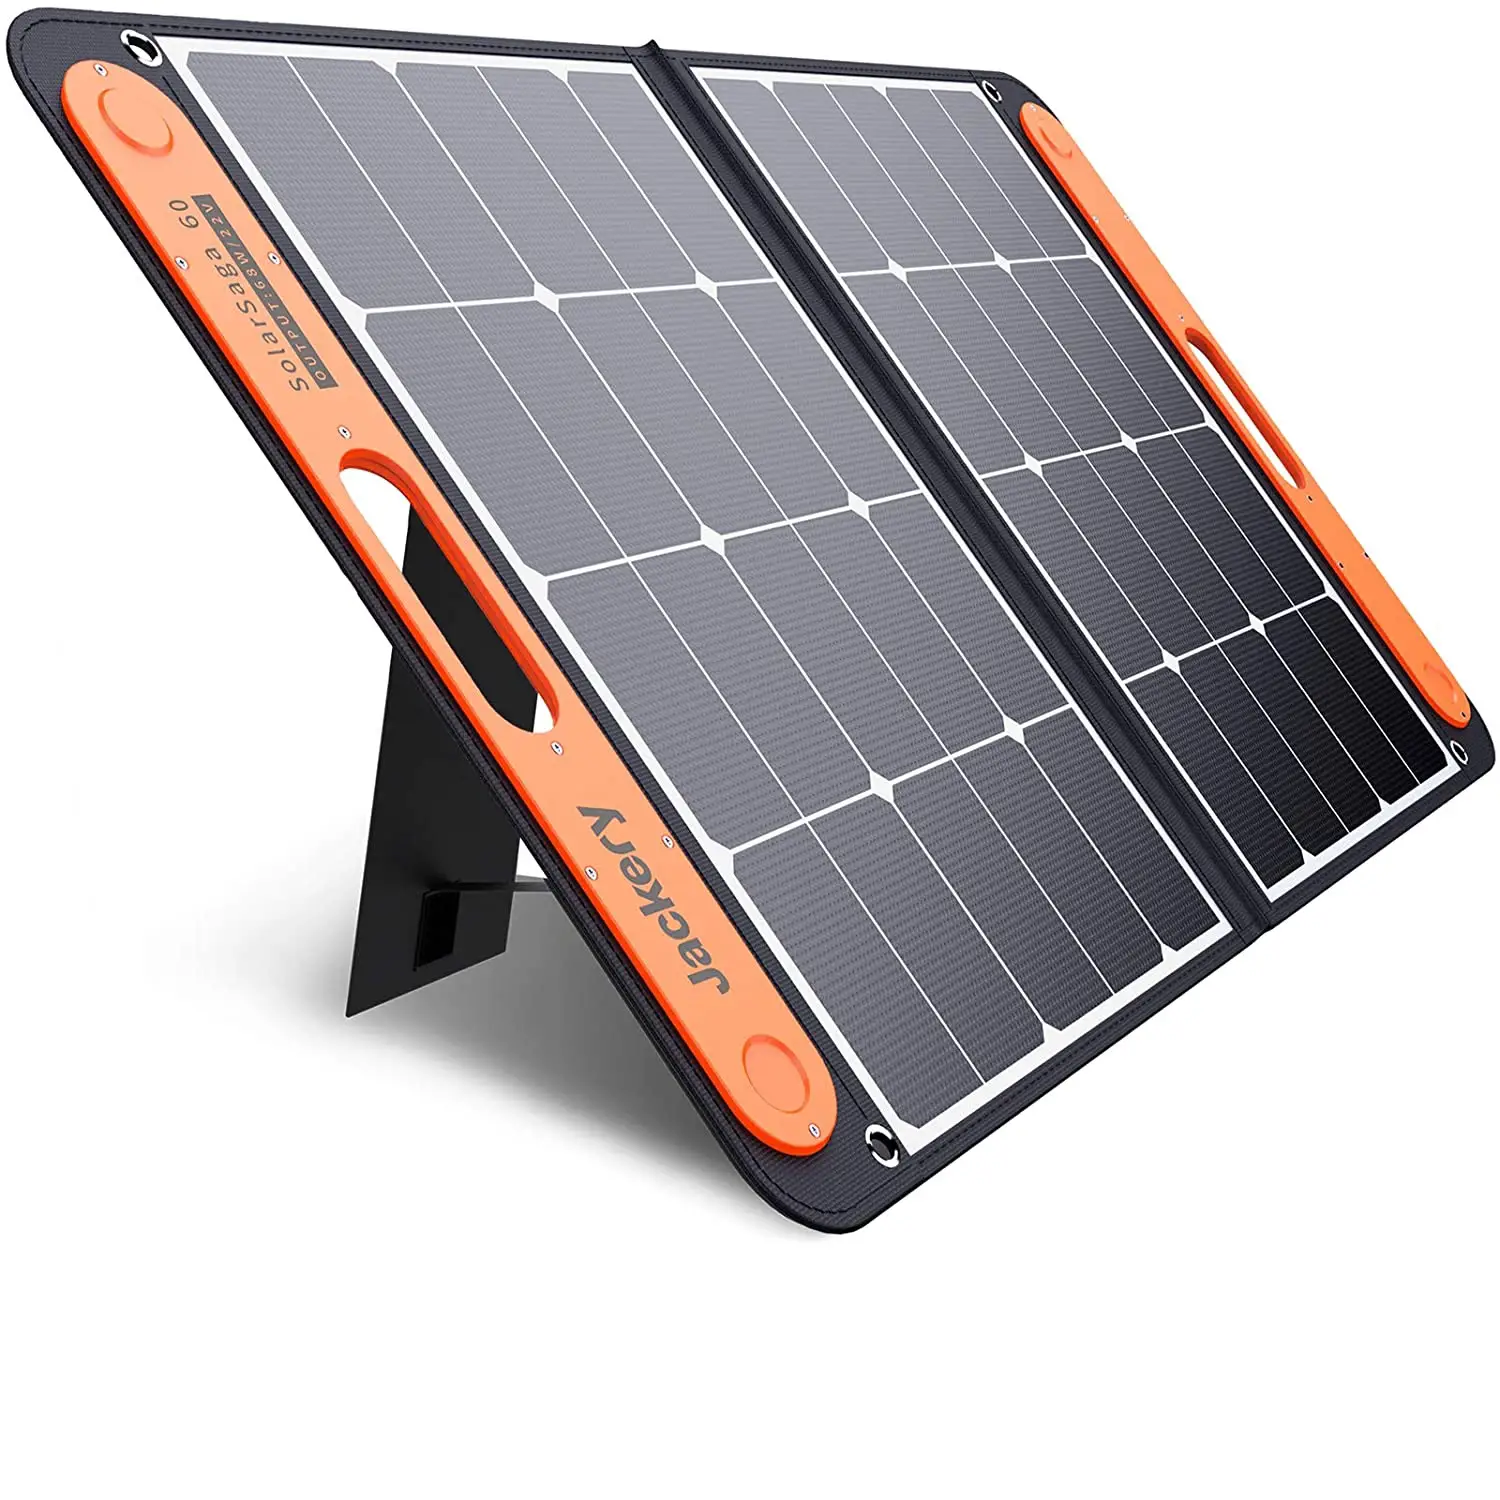 Top 5 Best Portable Solar Panels for RV [2022 Review]